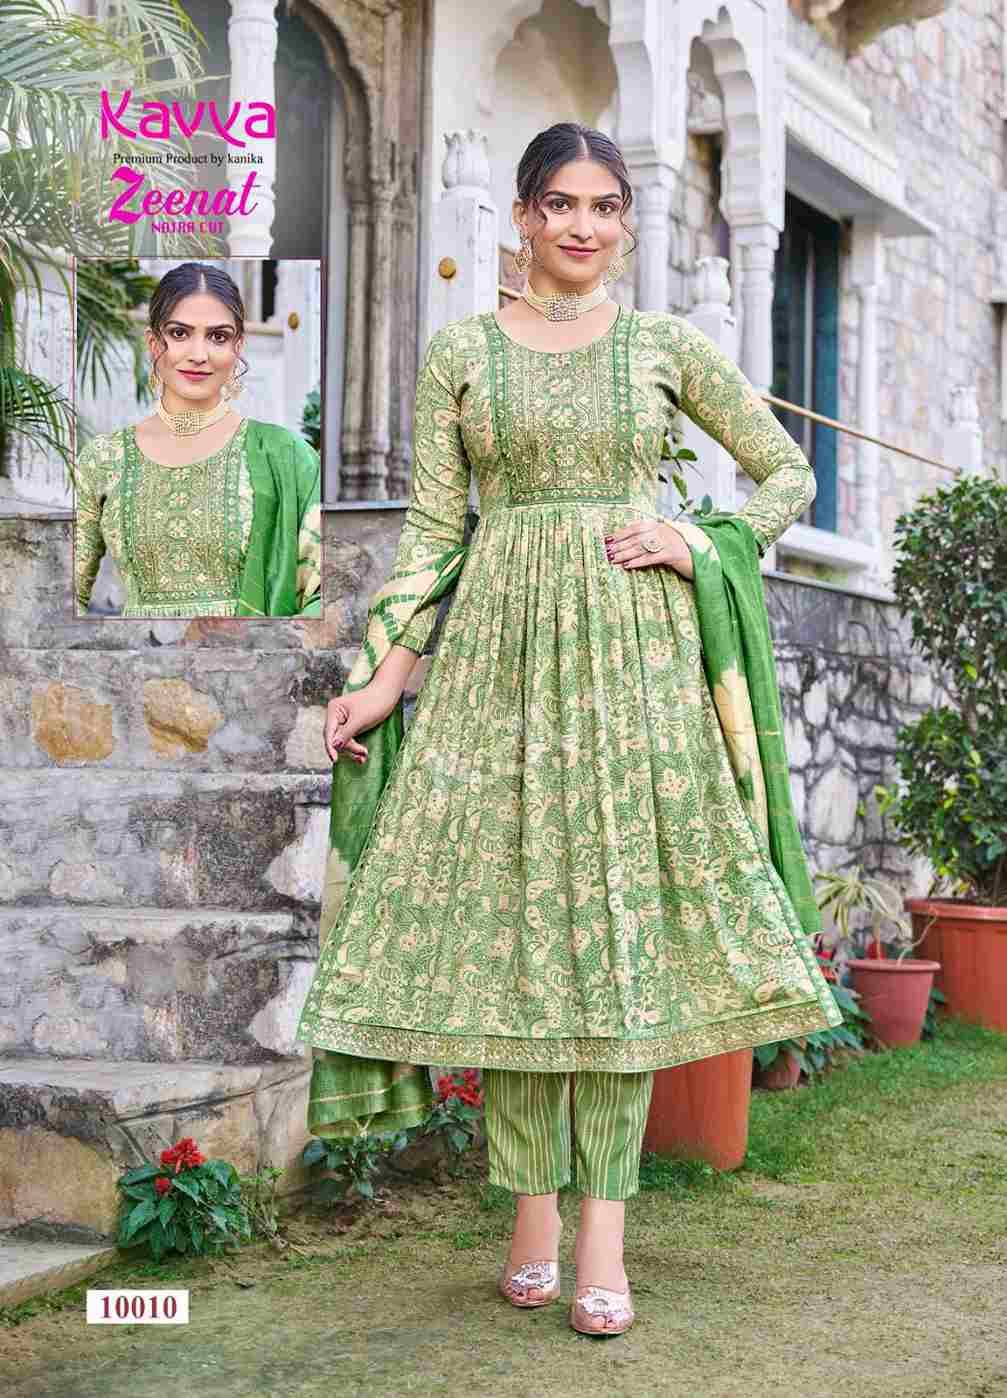 Zeenat Vol-10 By Kavya 10001 To 10010 Series Beautiful Stylish Festive Suits Fancy Colorful Casual Wear & Ethnic Wear & Ready To Wear Capsule Print Dresses At Wholesale Price